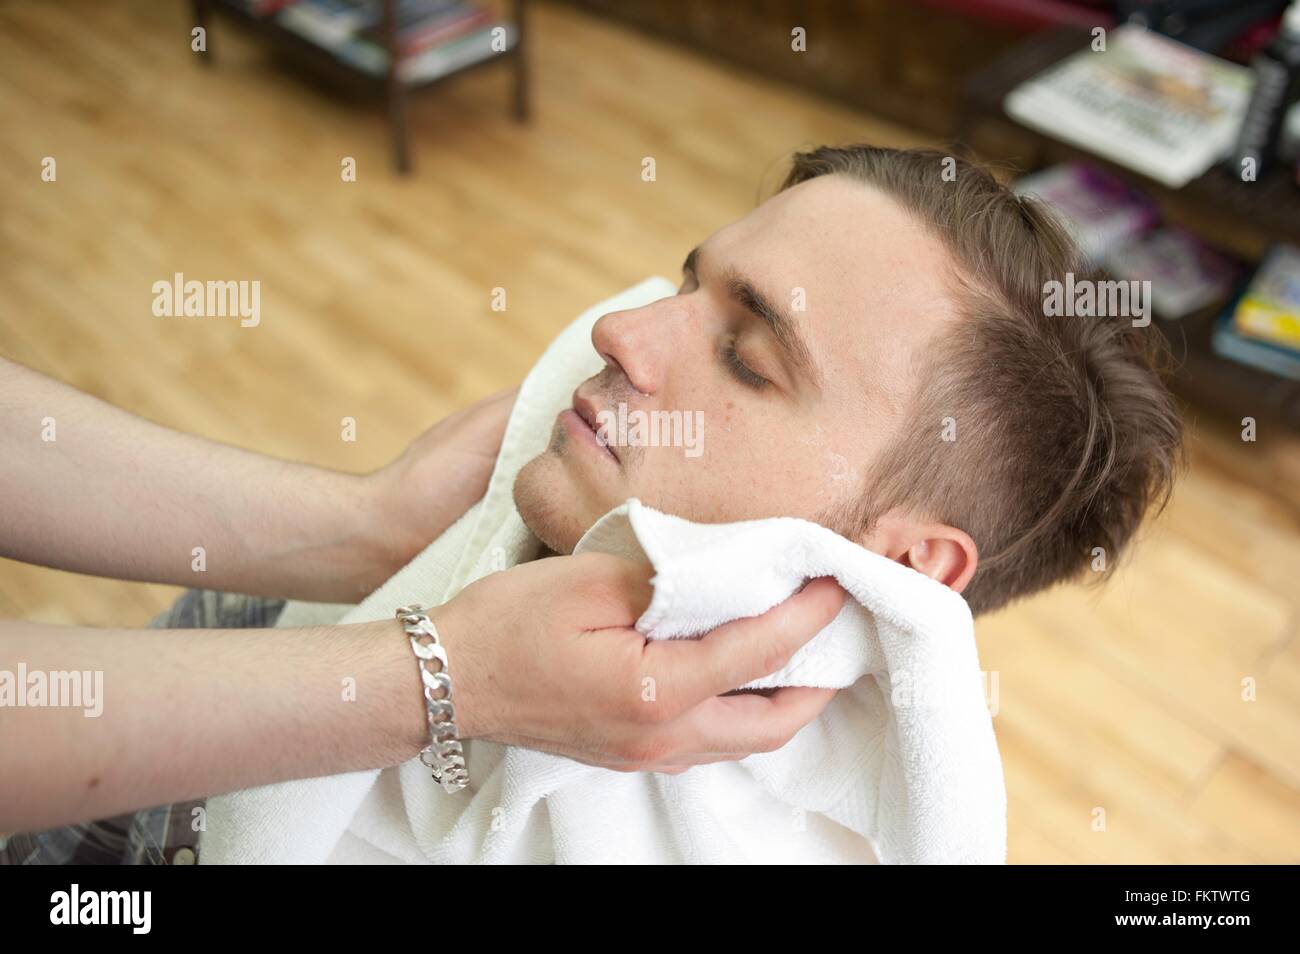 High angle side view of young man in barbershop, head back, eyes closed having face dried with towel Stock Photo